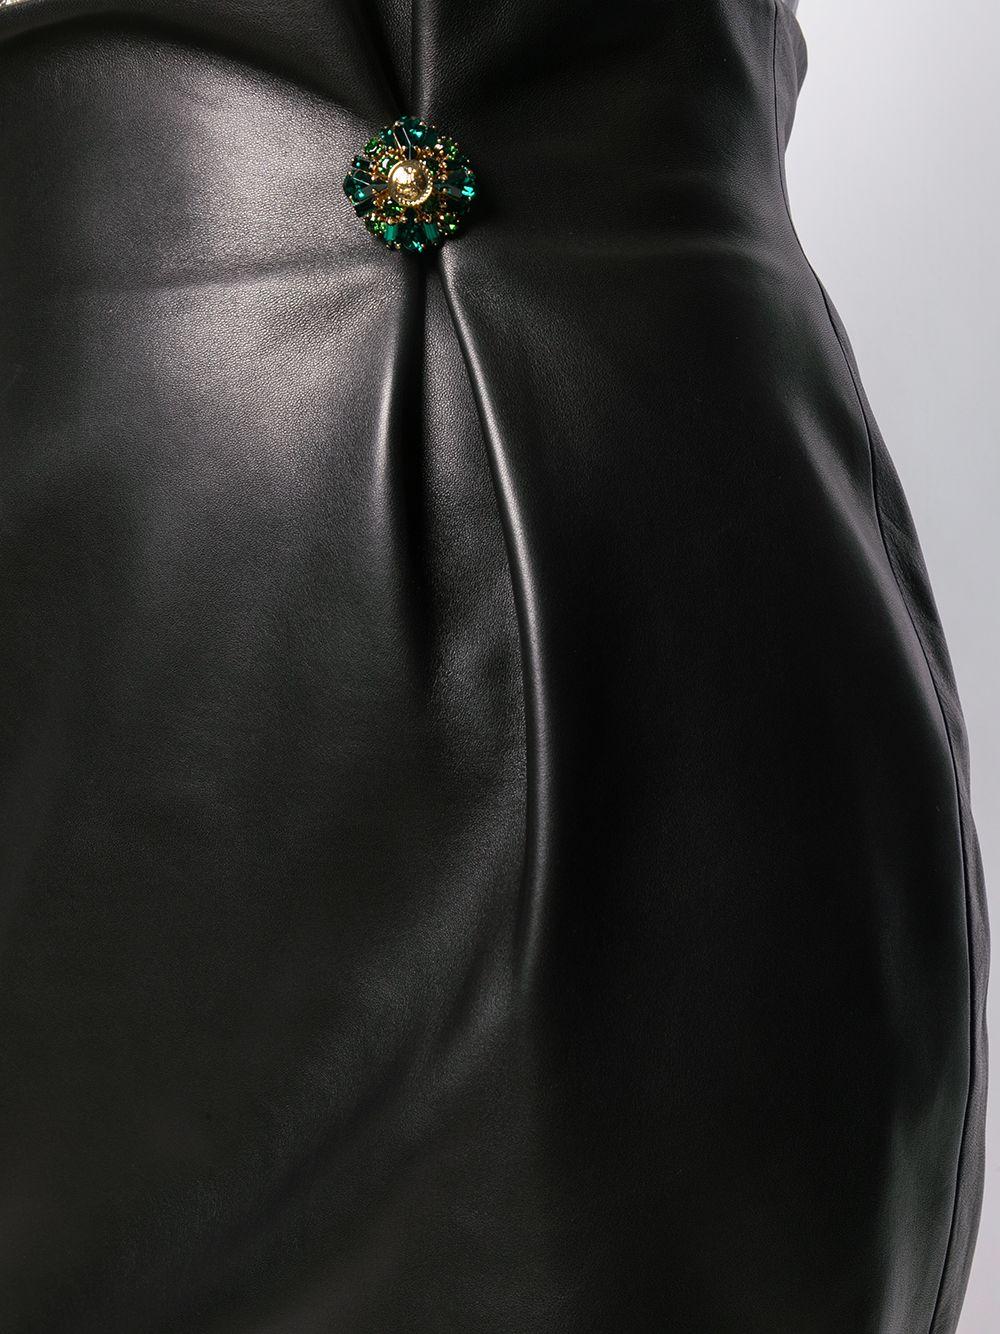 Women's Versace Runway Black Leather Crystal Embellished High Waisted Mini Skirt Size 40 For Sale